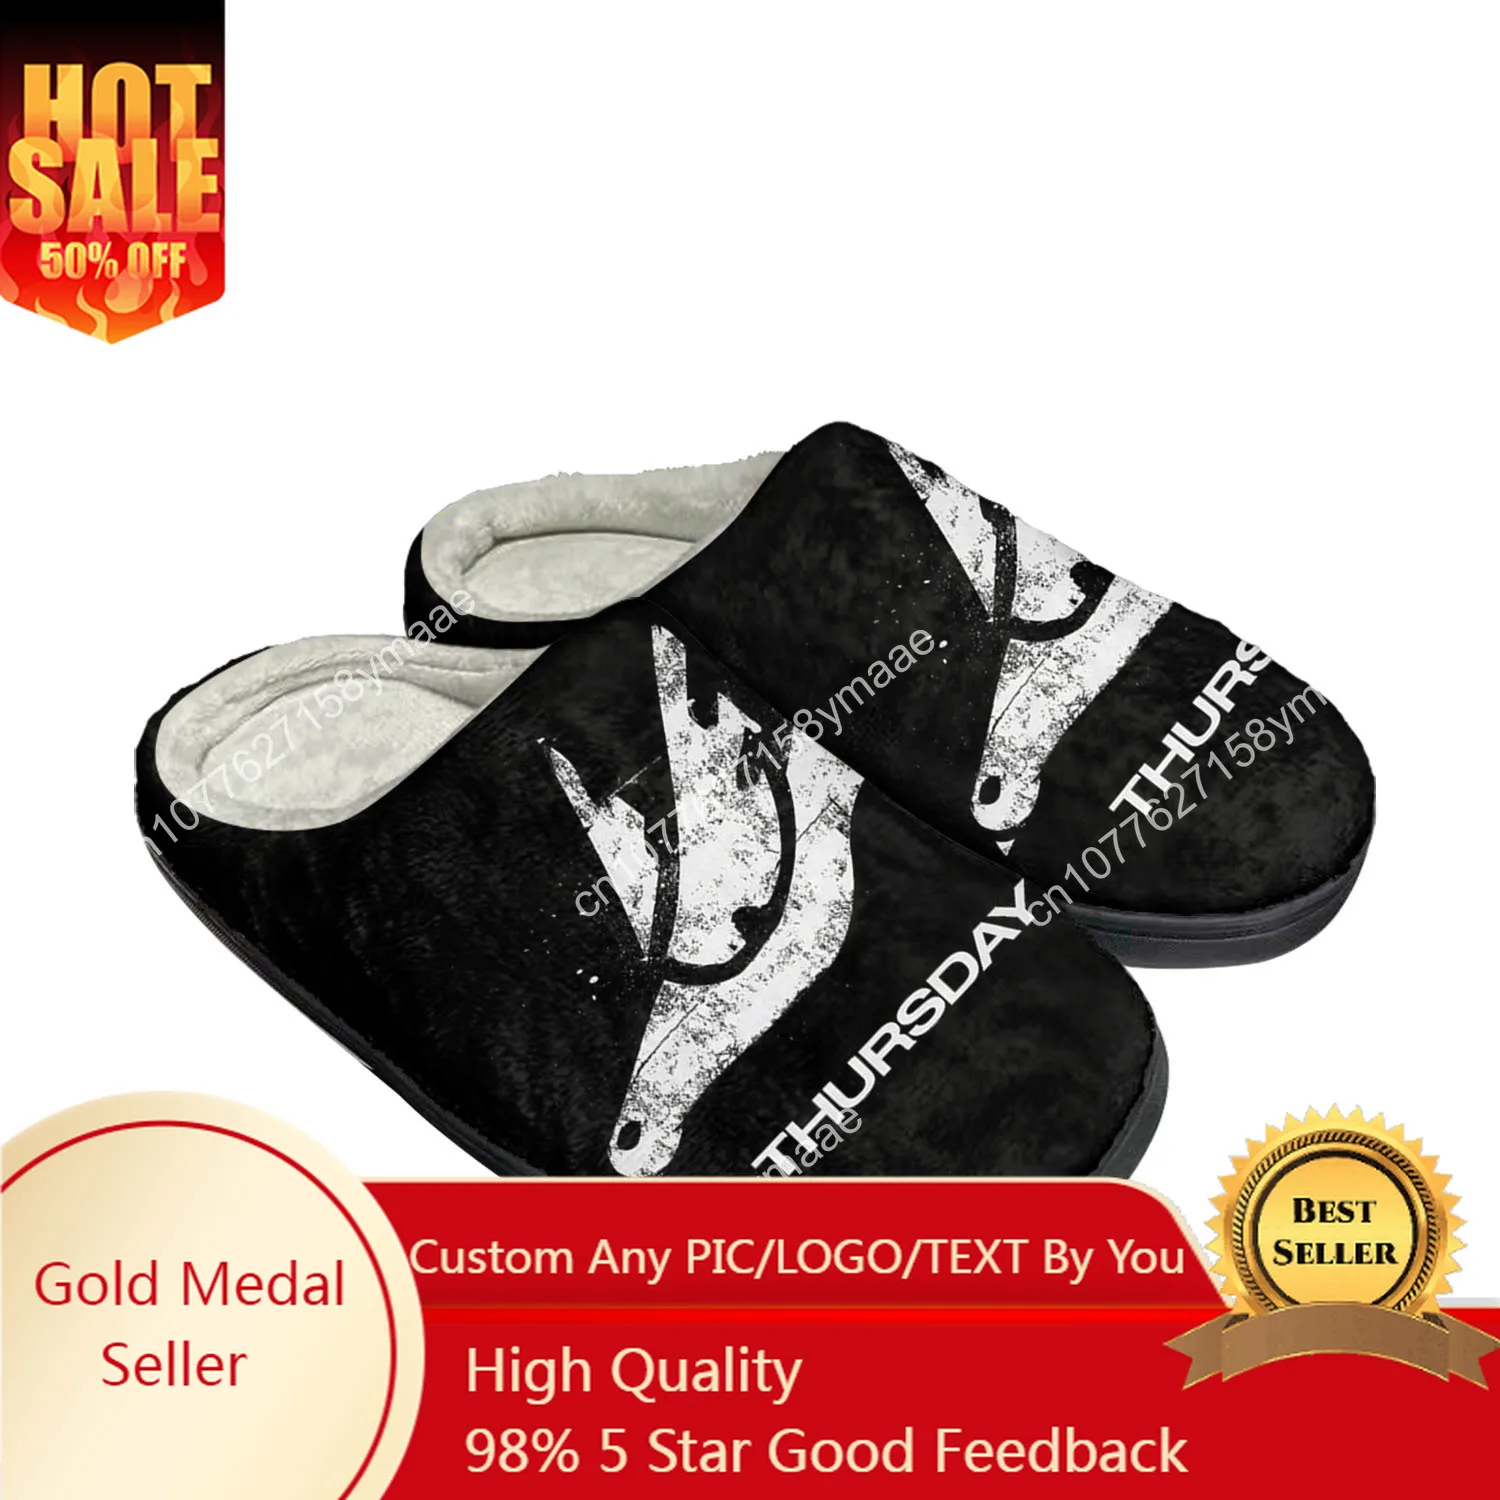 Thursday Band Home Cotton Slippers Mens Womens Plush Bedroom Casual Keep Warm Shoes Thermal Indoor Slipper Customized Shoe winter mens home slippers gingham fur printed plush cotton shoes male anti skid slides slipper warm indoor bedroom man footwear